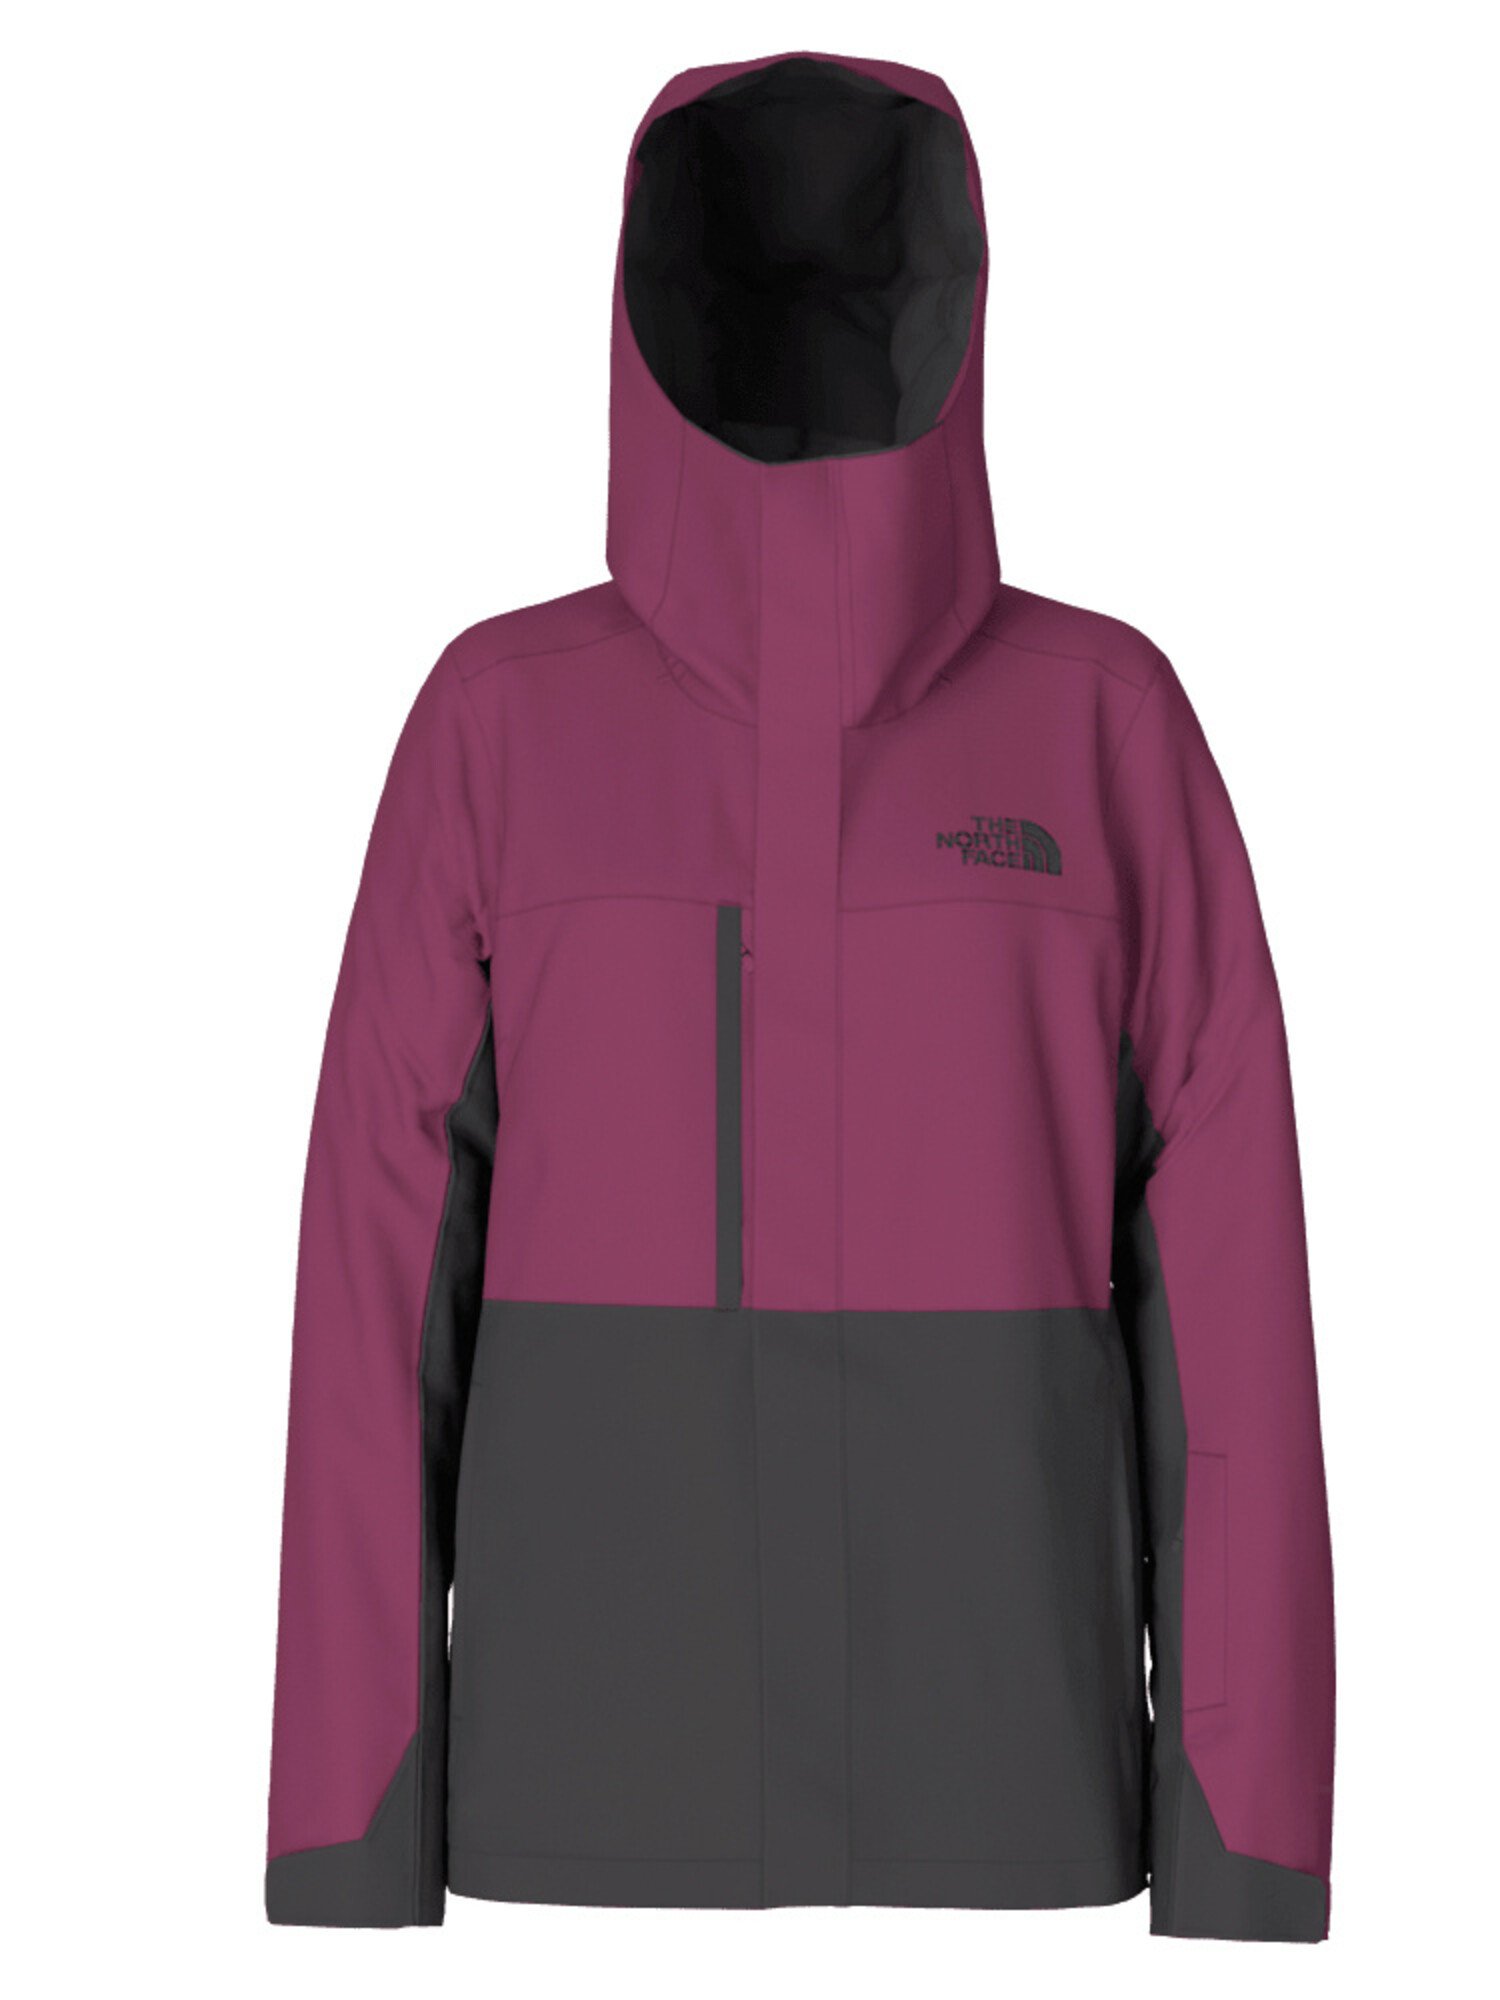 https://cdn.shoplightspeed.com/shops/659992/files/56804191/1500x4000x3/the-north-face-the-north-face-freedom-insulated-ja.jpg